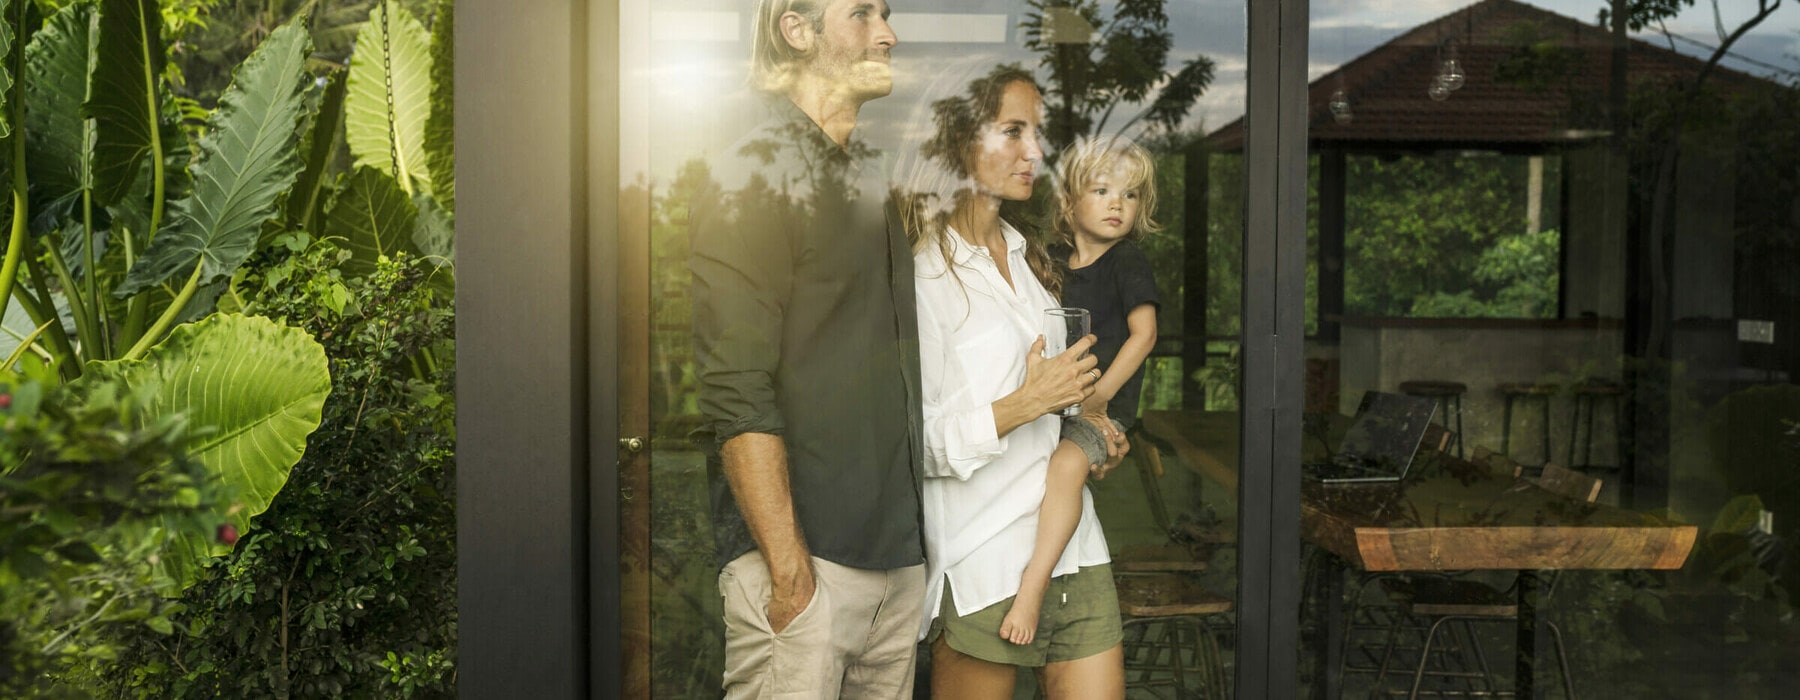 garden view of parents with their young son looking outside of their design house surrounded by lush tropical garden